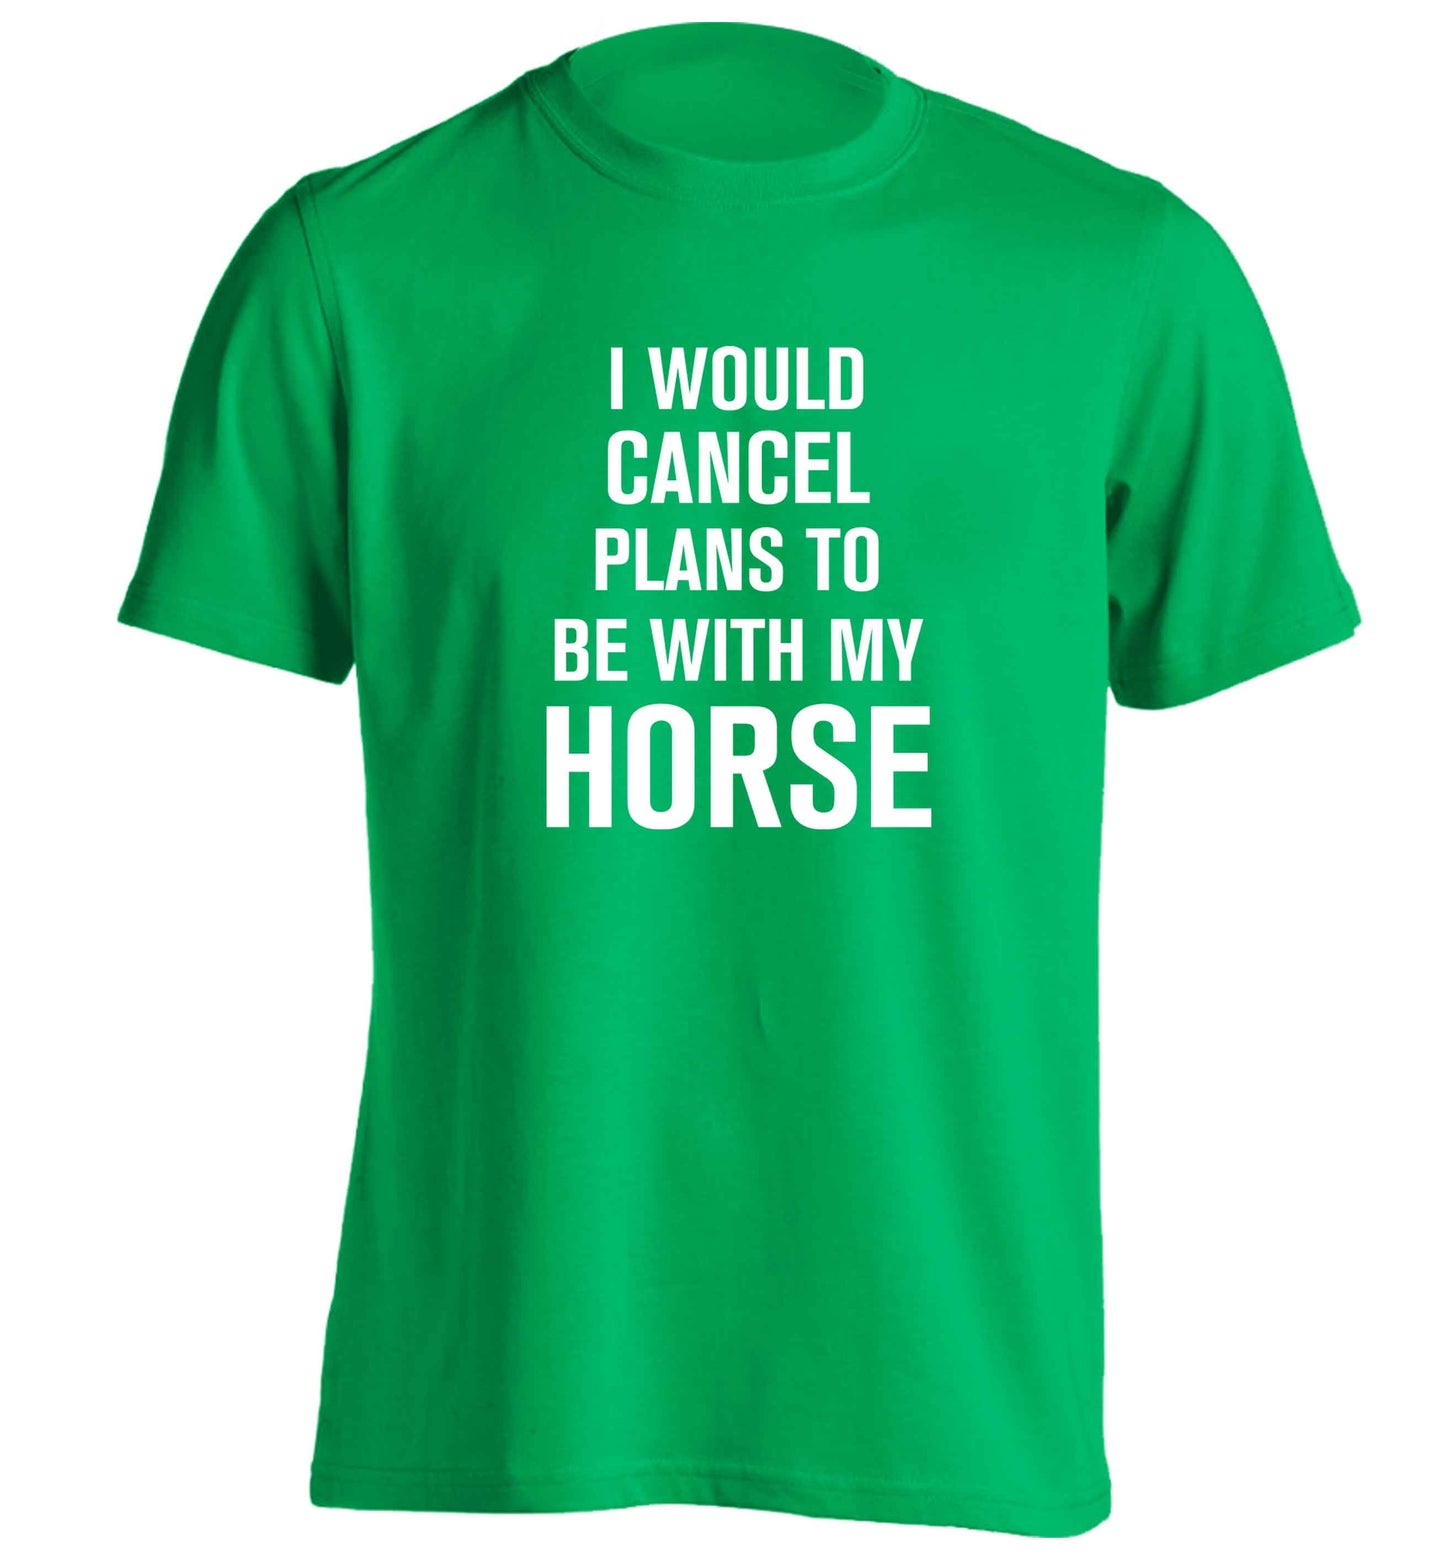 I will cancel plans to be with my horse adults unisex green Tshirt 2XL